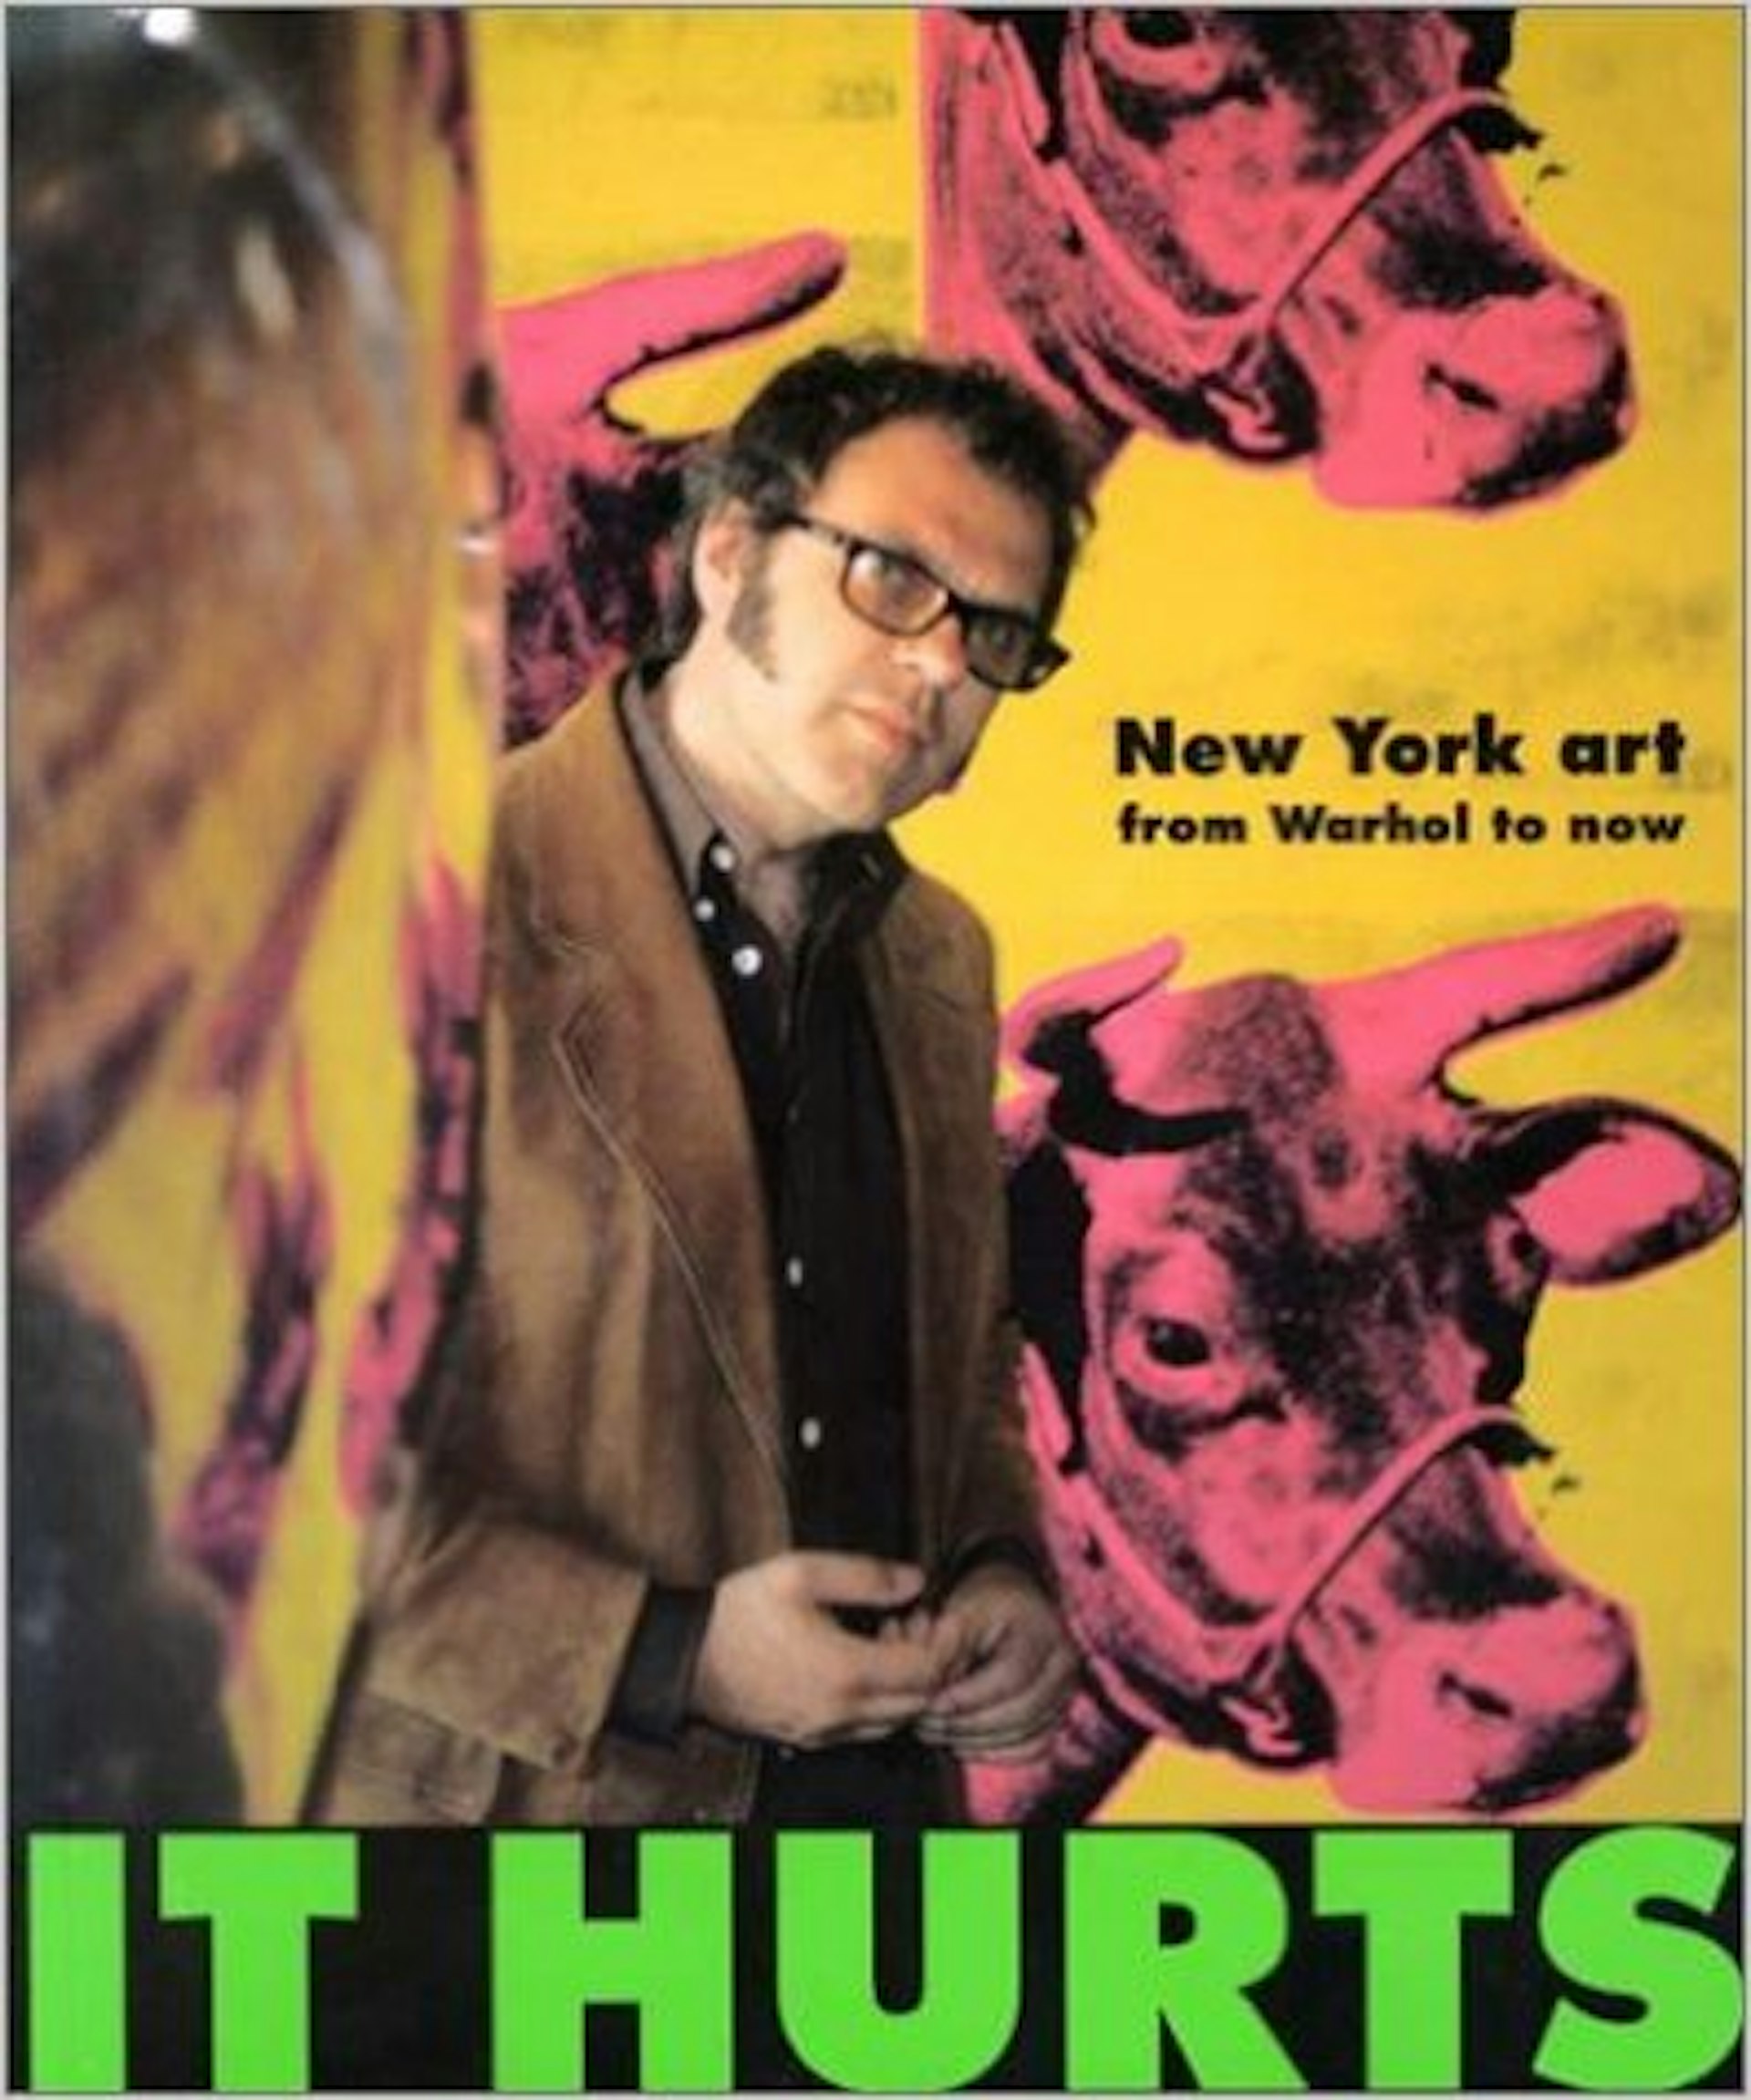 "It Hurts: New York Art from Warhol to Now" by Matthew Collings with photographs by Ian MacMillan, published in 21